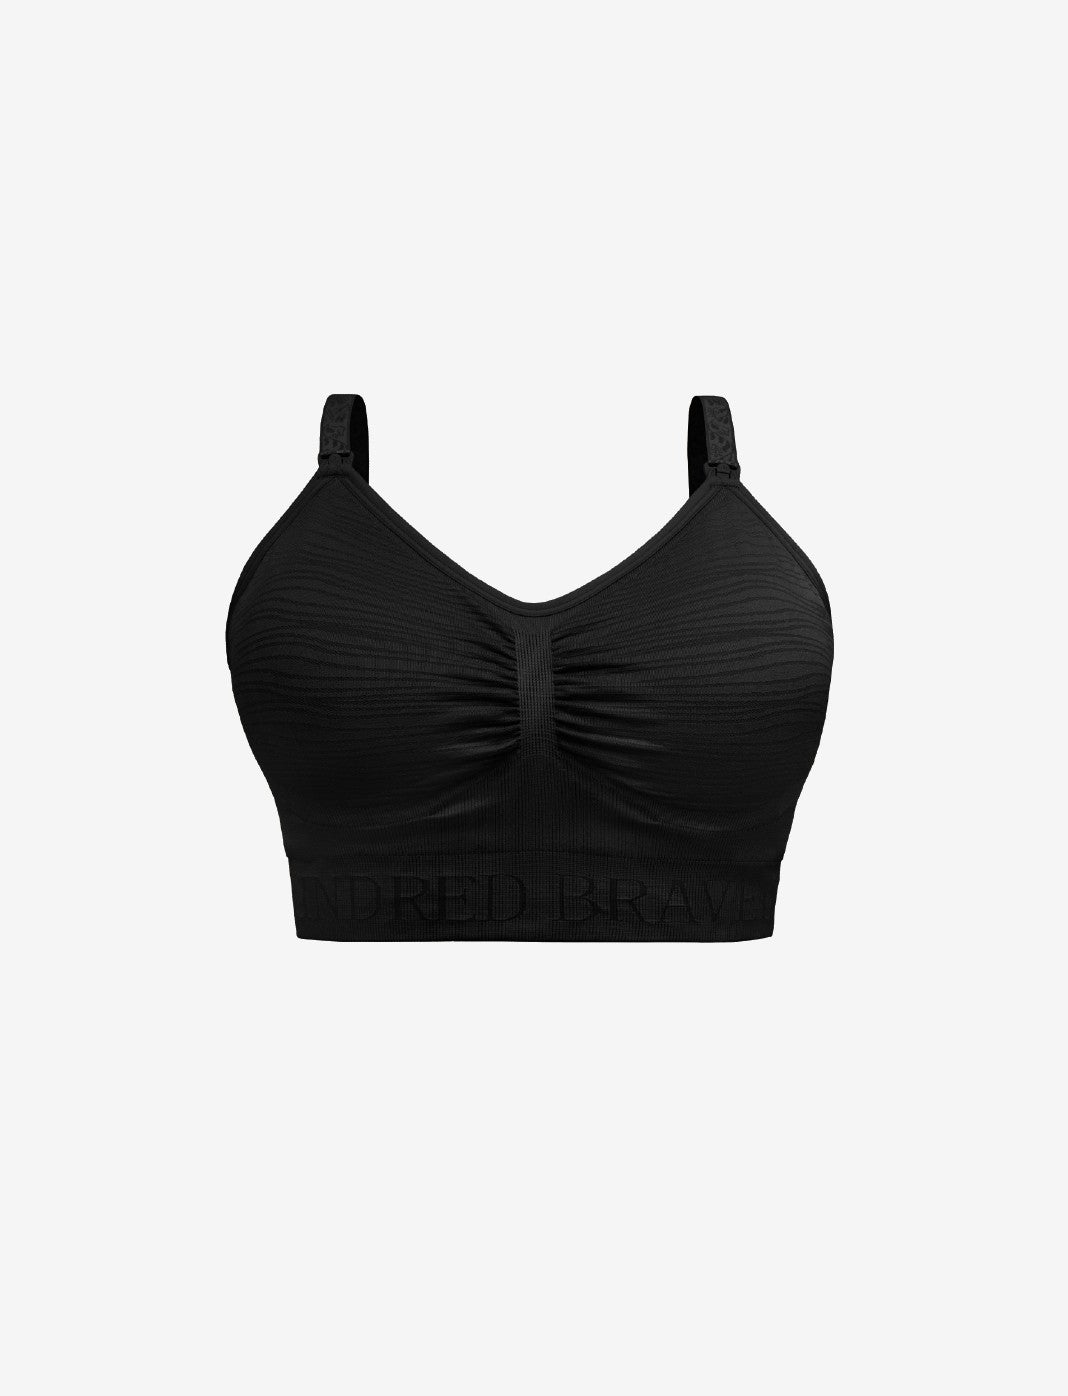  Kindred Bravely Minimalist Hands Free Pumping Bra Patented  All-in-One Pumping & Nursing Plunge Bra